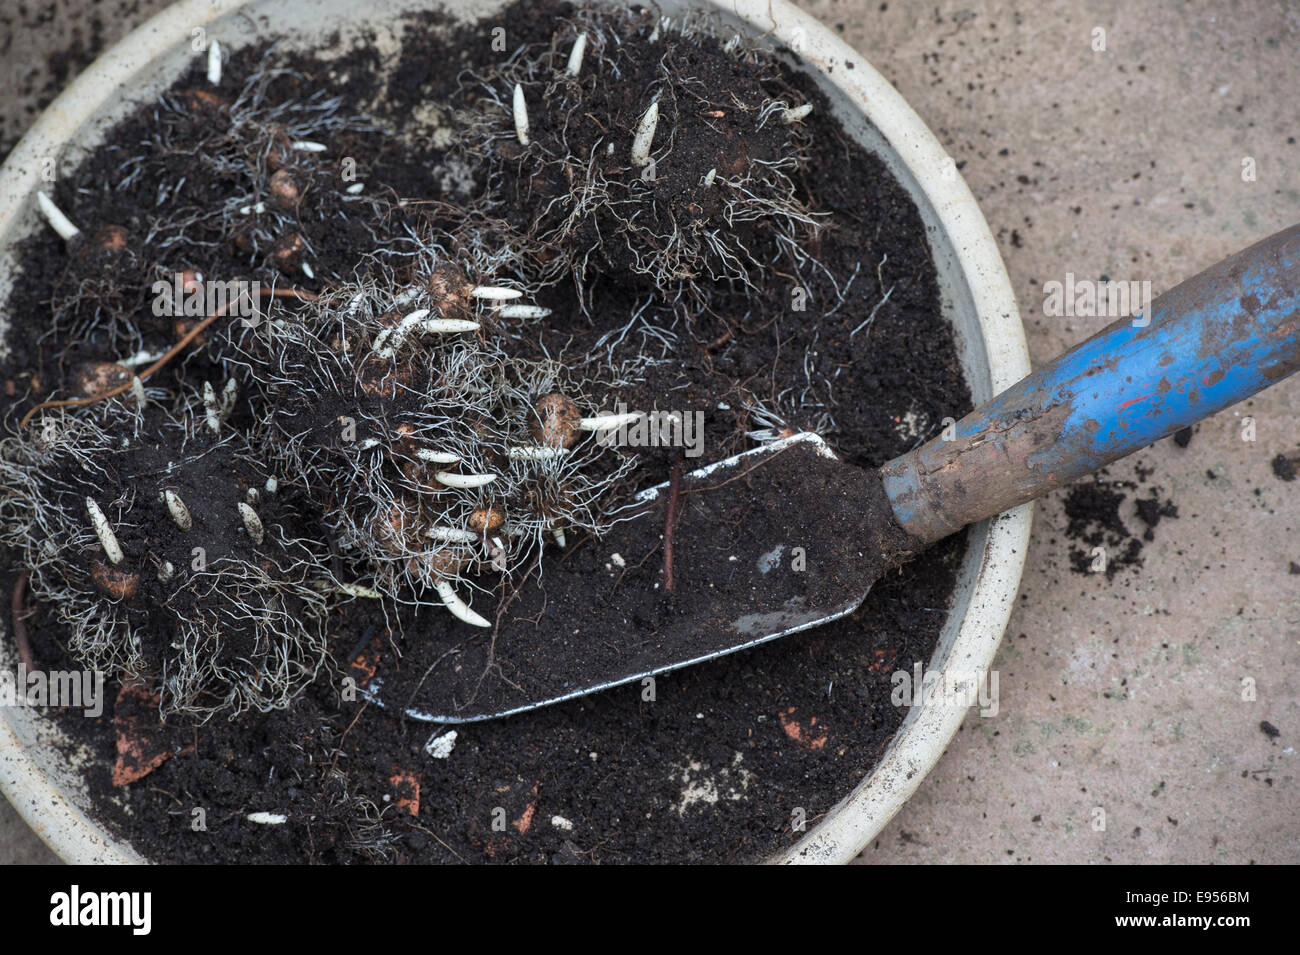 Dug up Crocus bulbs in a plant pot with a hand trowel Stock Photo